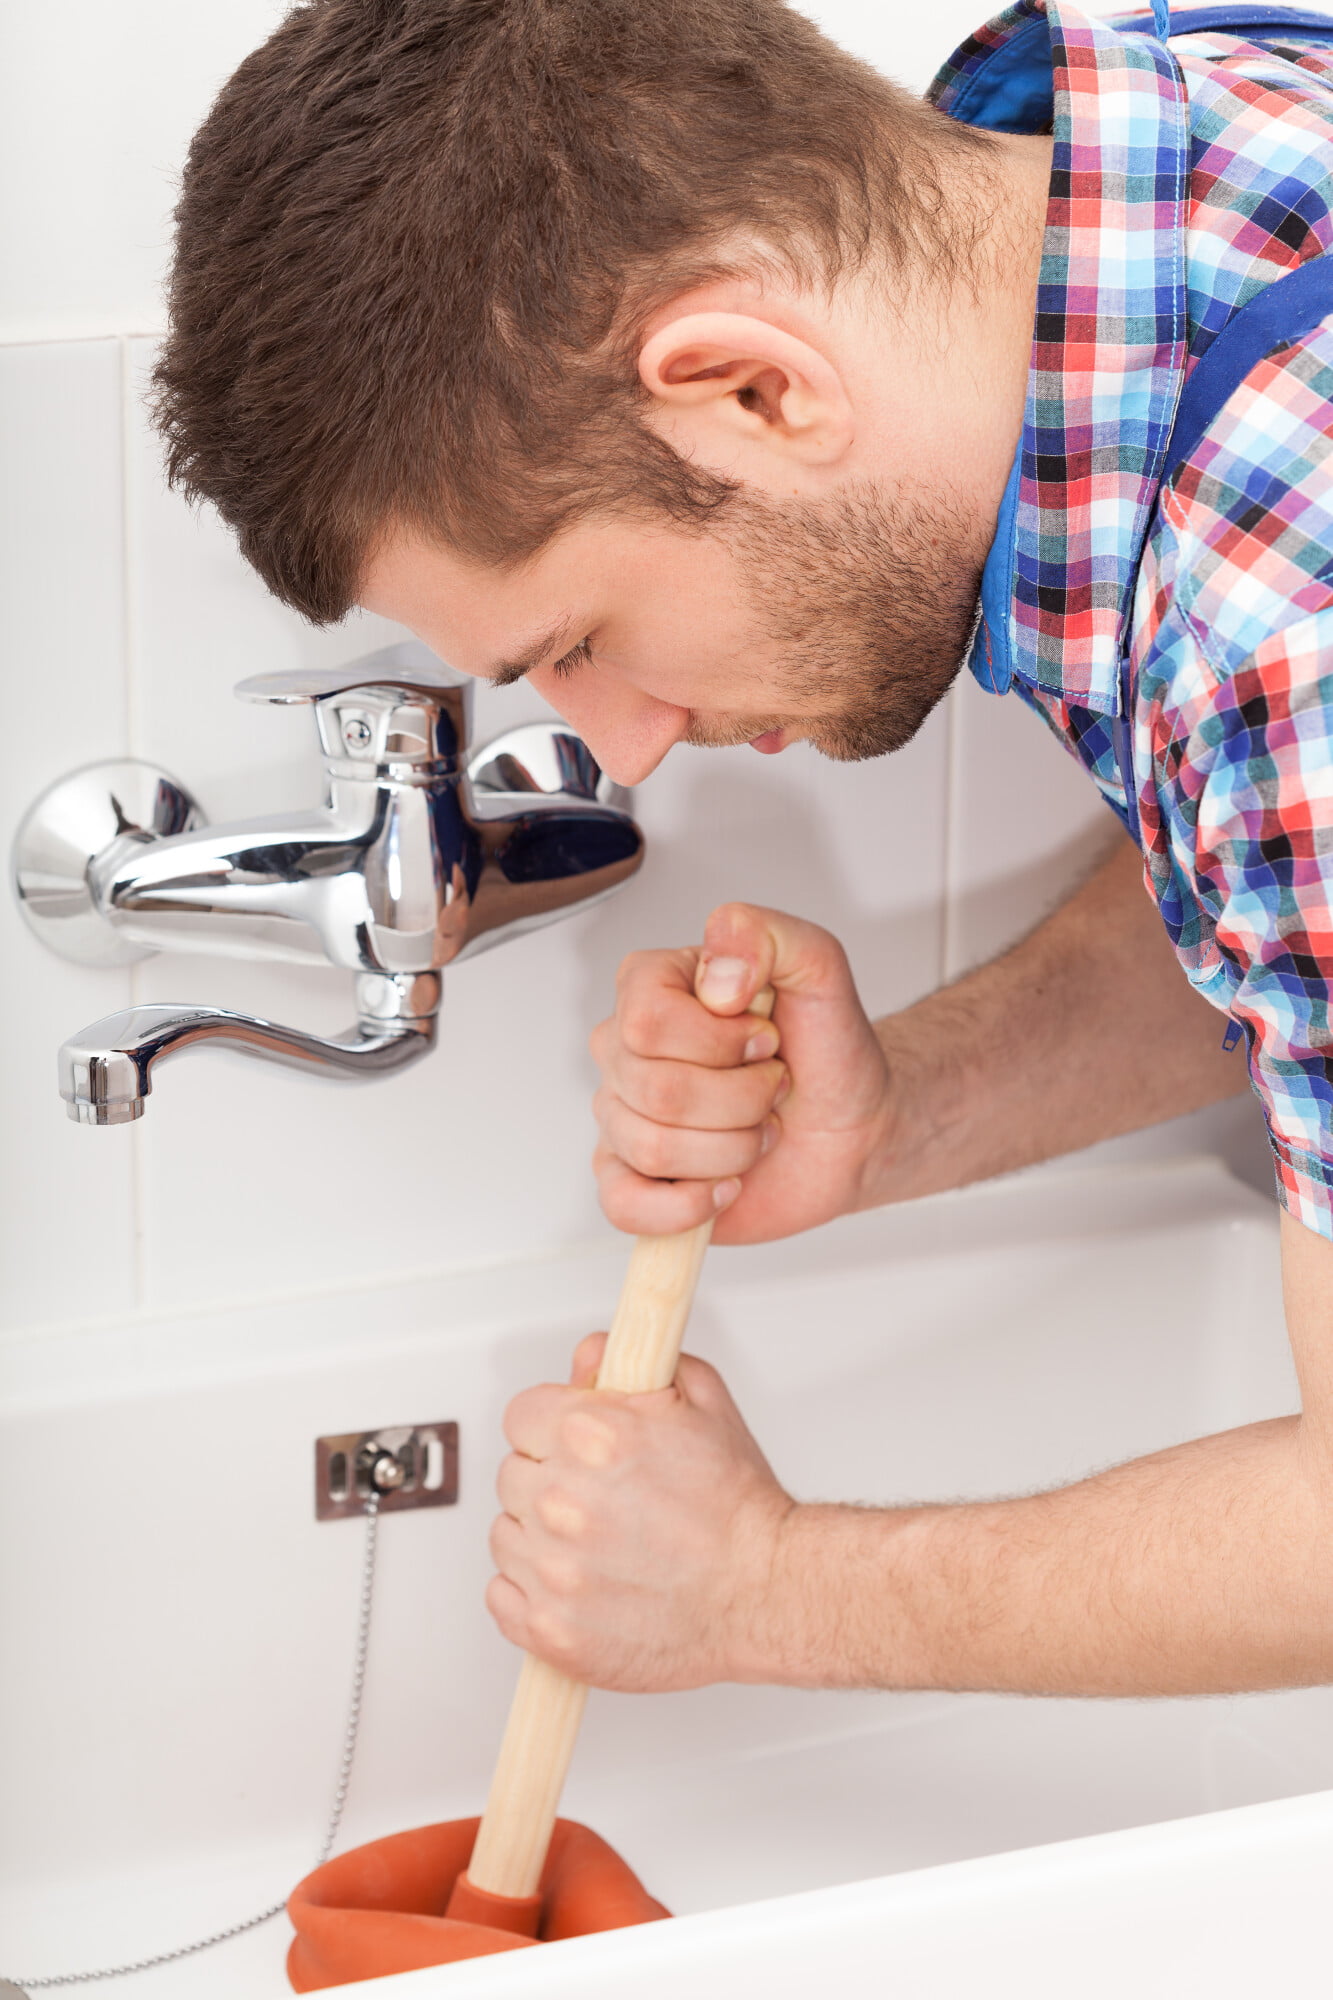 Clogged drains is one of the most common plumbing problems that homeowners experience. Check out these 6 common causes of clogged drains.